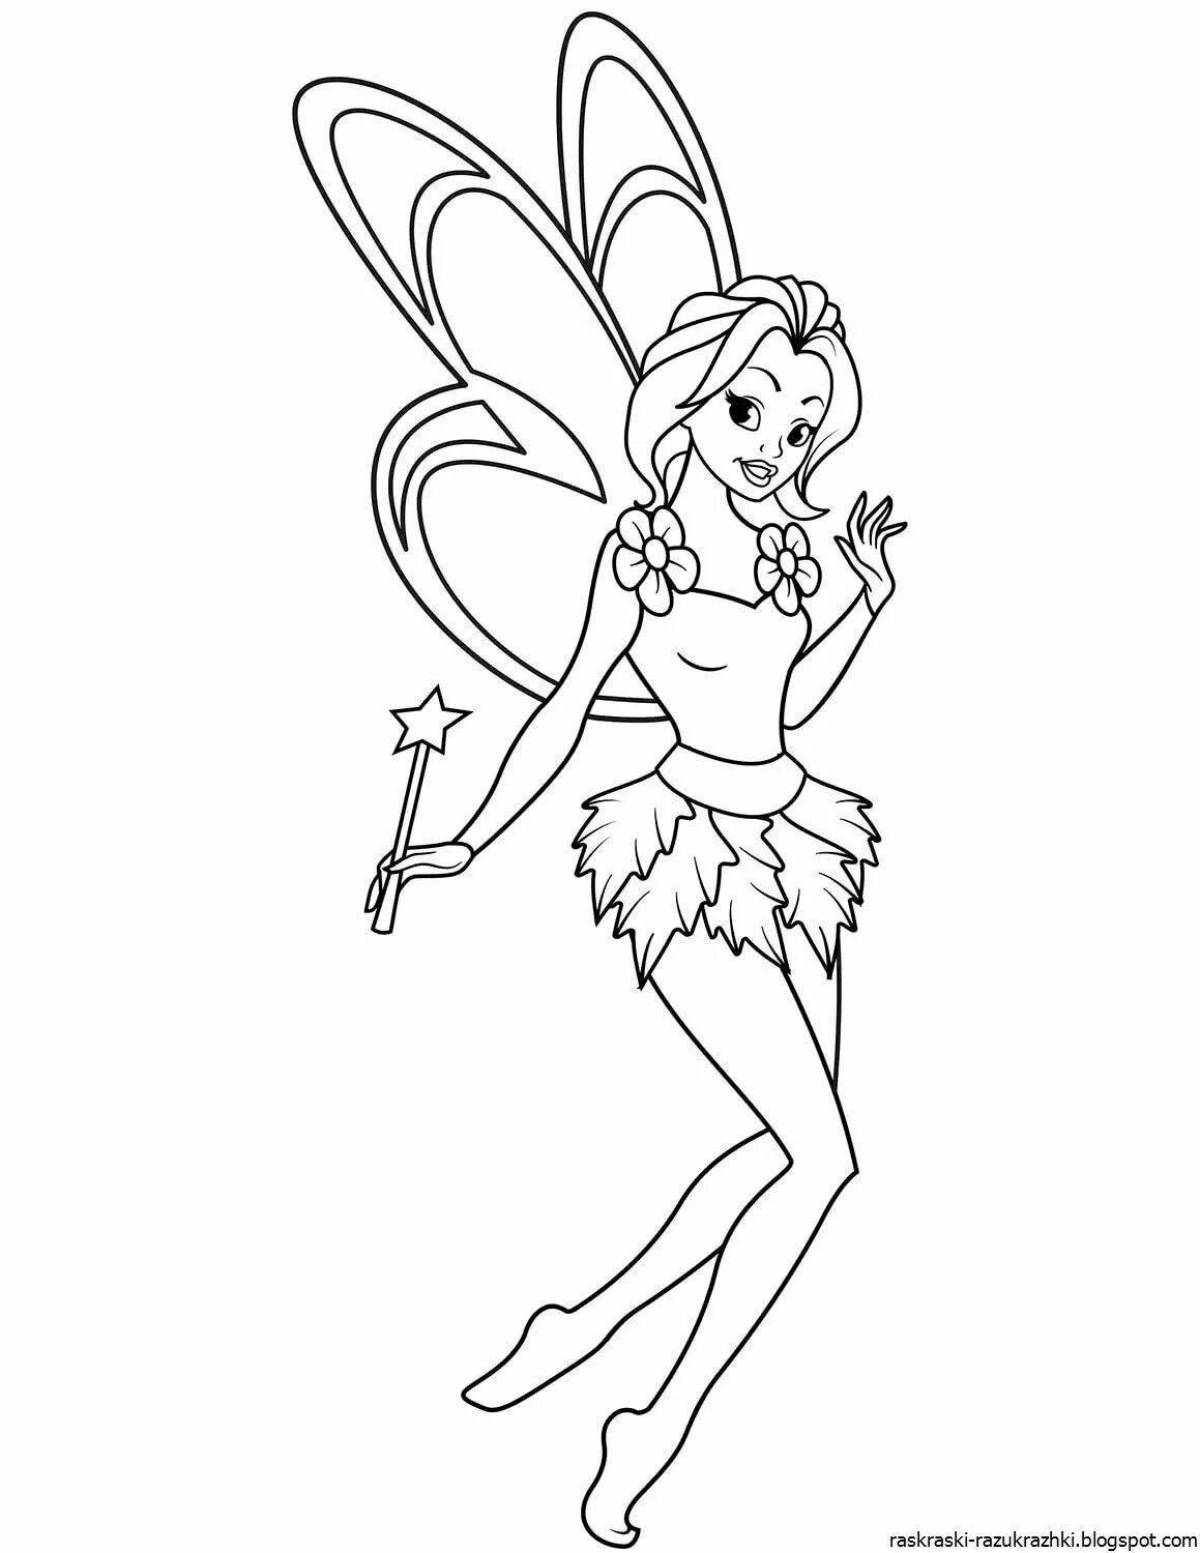 Fairy live coloring